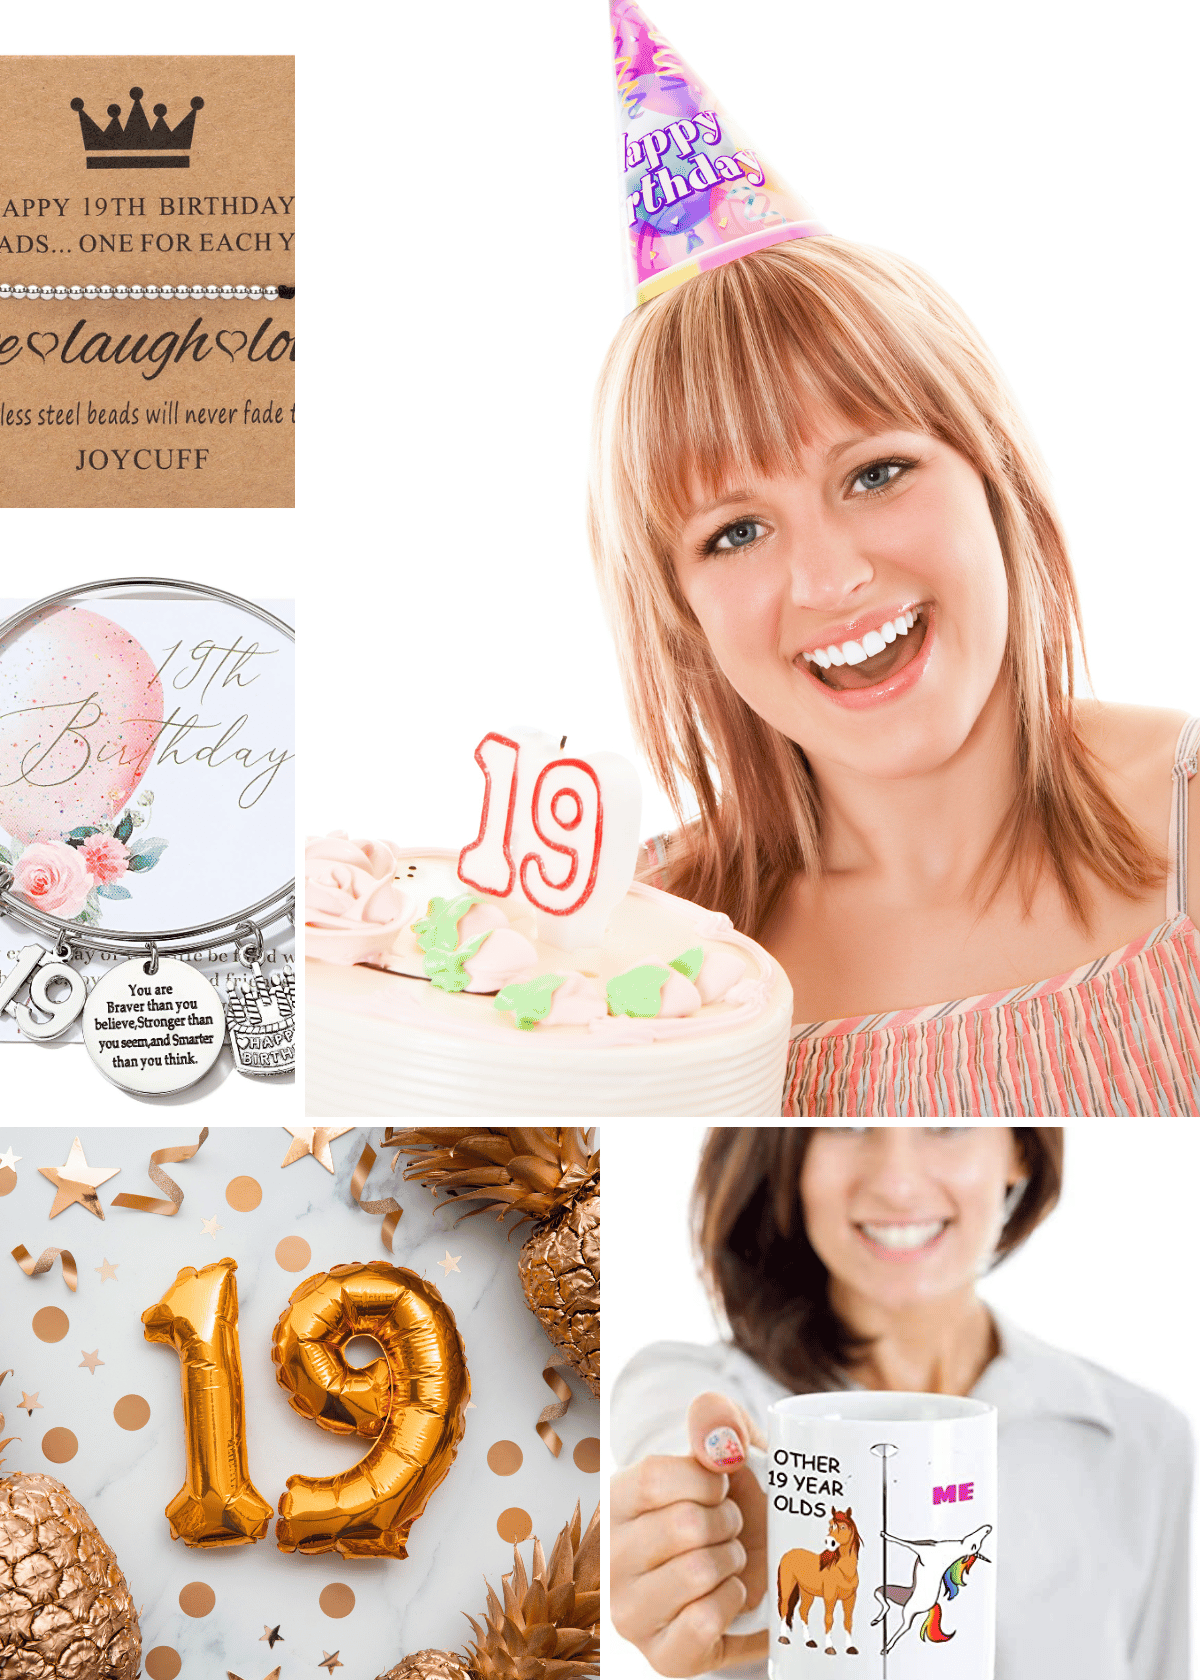 How To Choose The Perfect Birthday Gift For A 19-Year-Old Girl